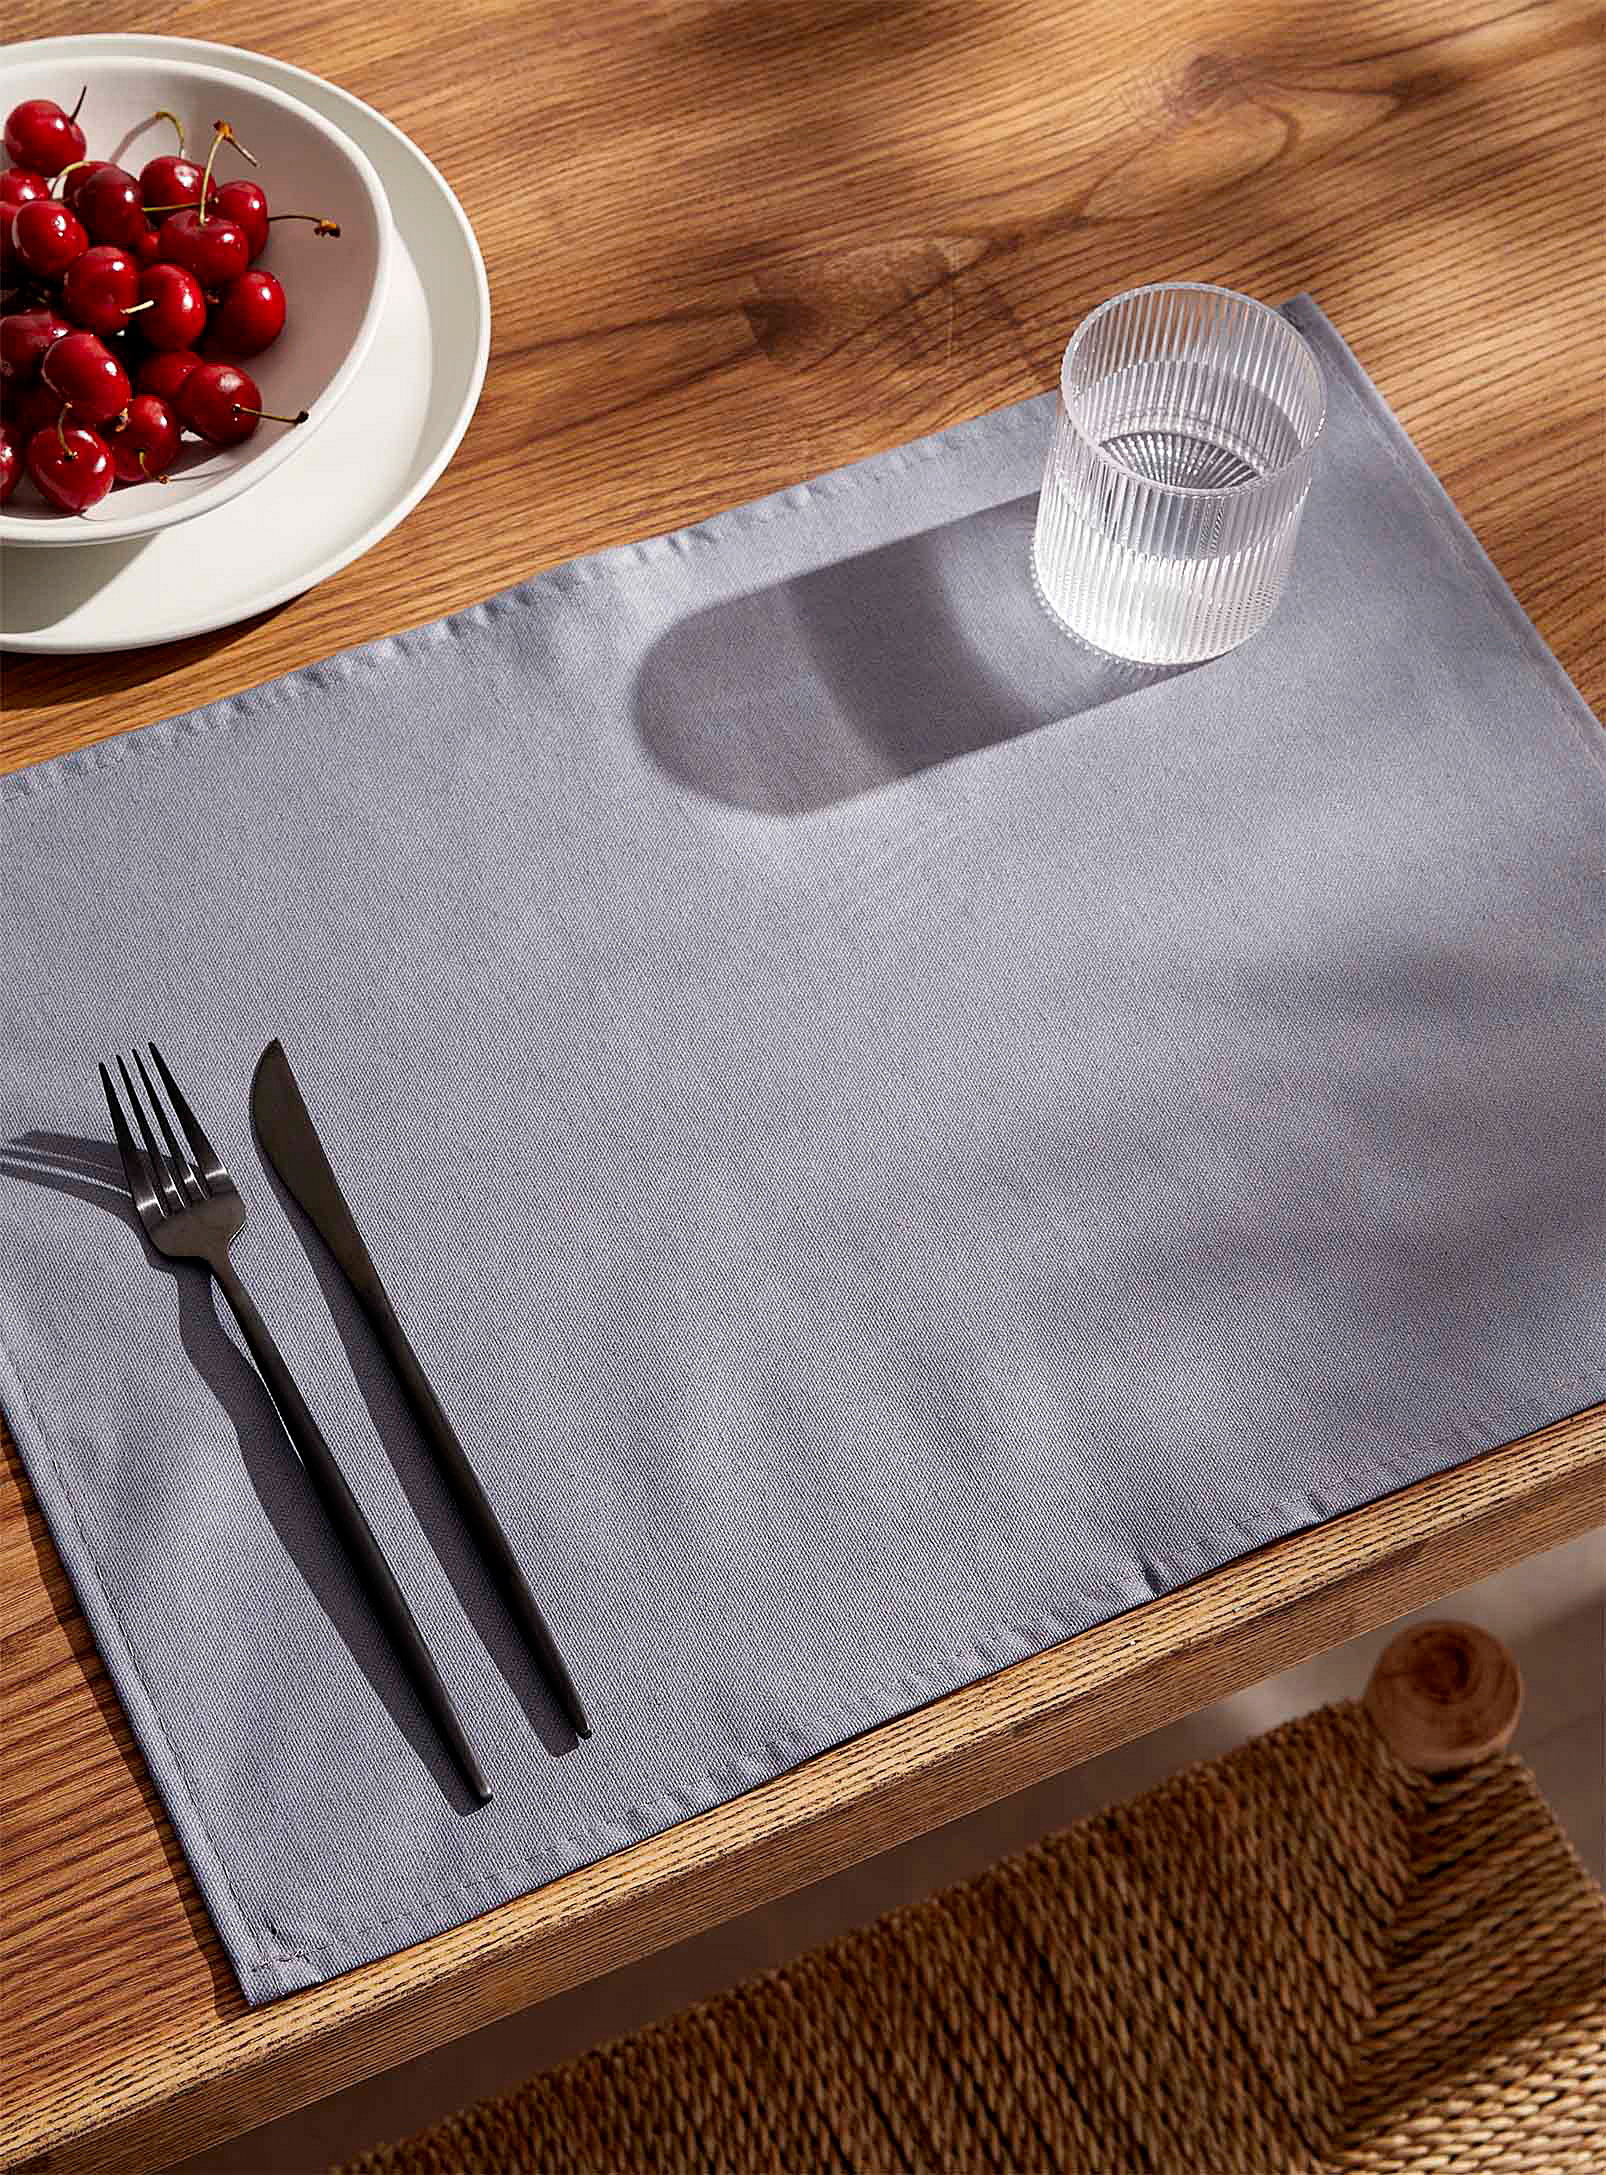 Simons Maison Monochrome Cotton And Linen Coated Placemat In Multi